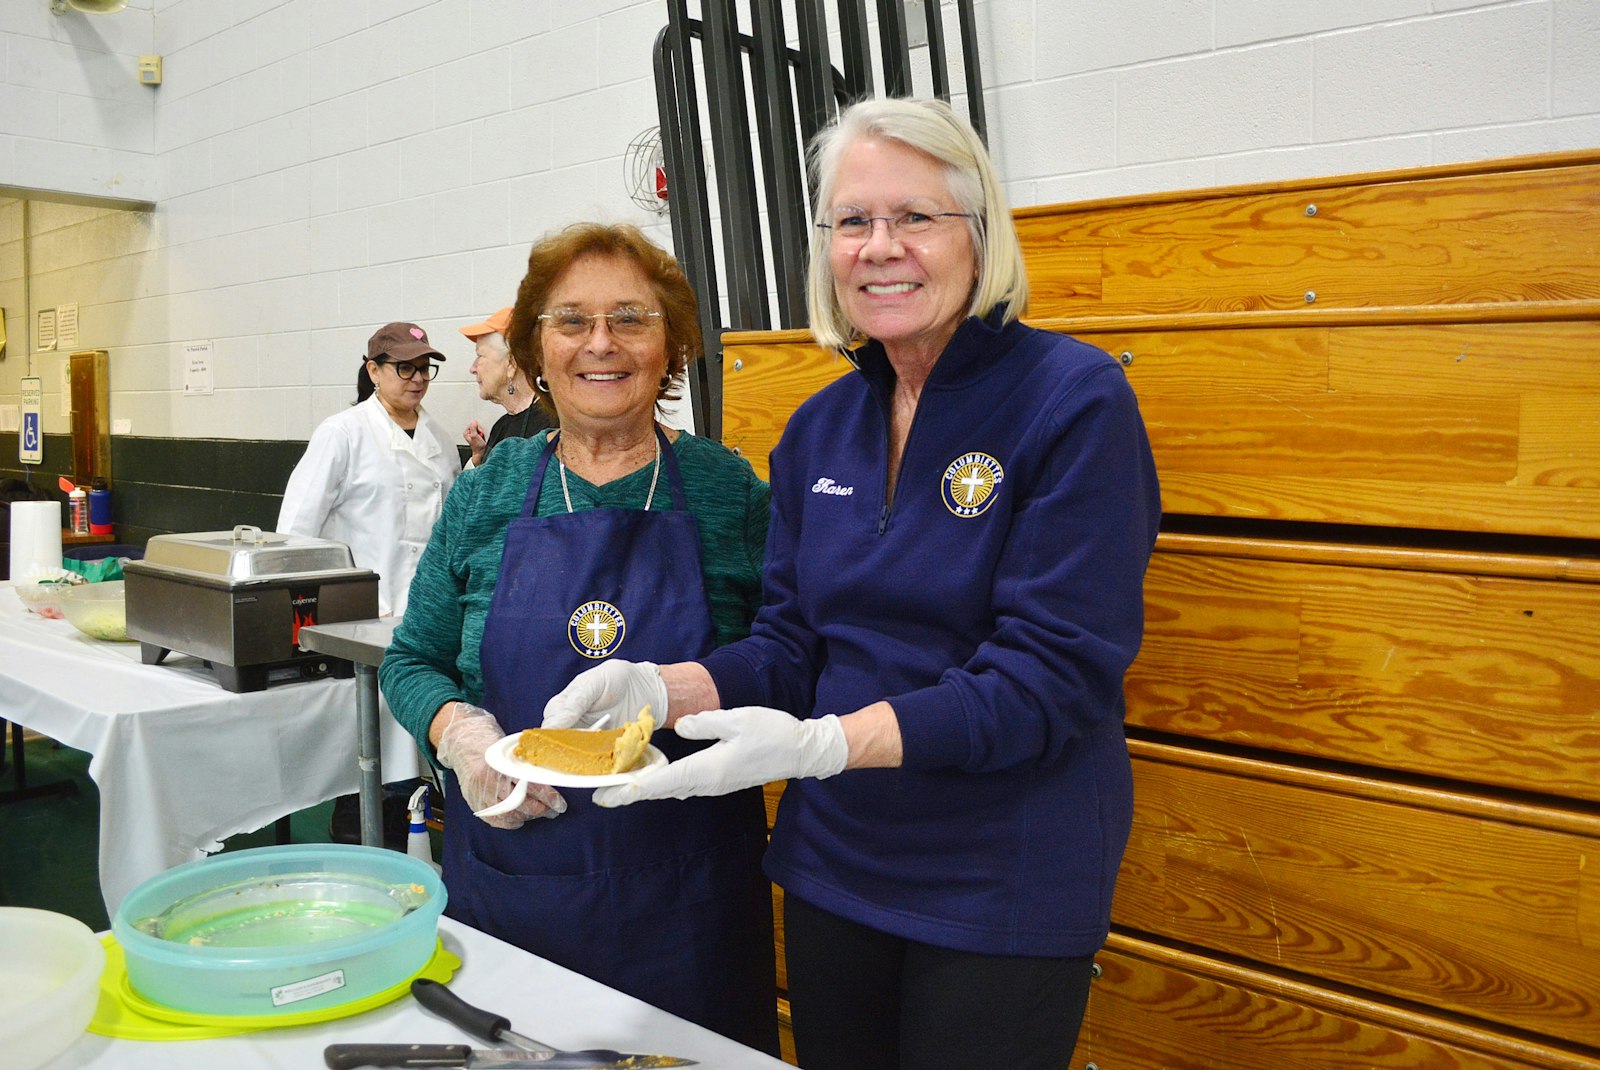 Judy Whitlock, left, and Karen Politowicz serve dessert during St. Patrick Parish's fish fry on Feb. 24. The parish's Columbiettes auxiliary serves alongside its Knights of Columbus council and provides support, activities and volunteer opportunities for women of the parish and beyond.